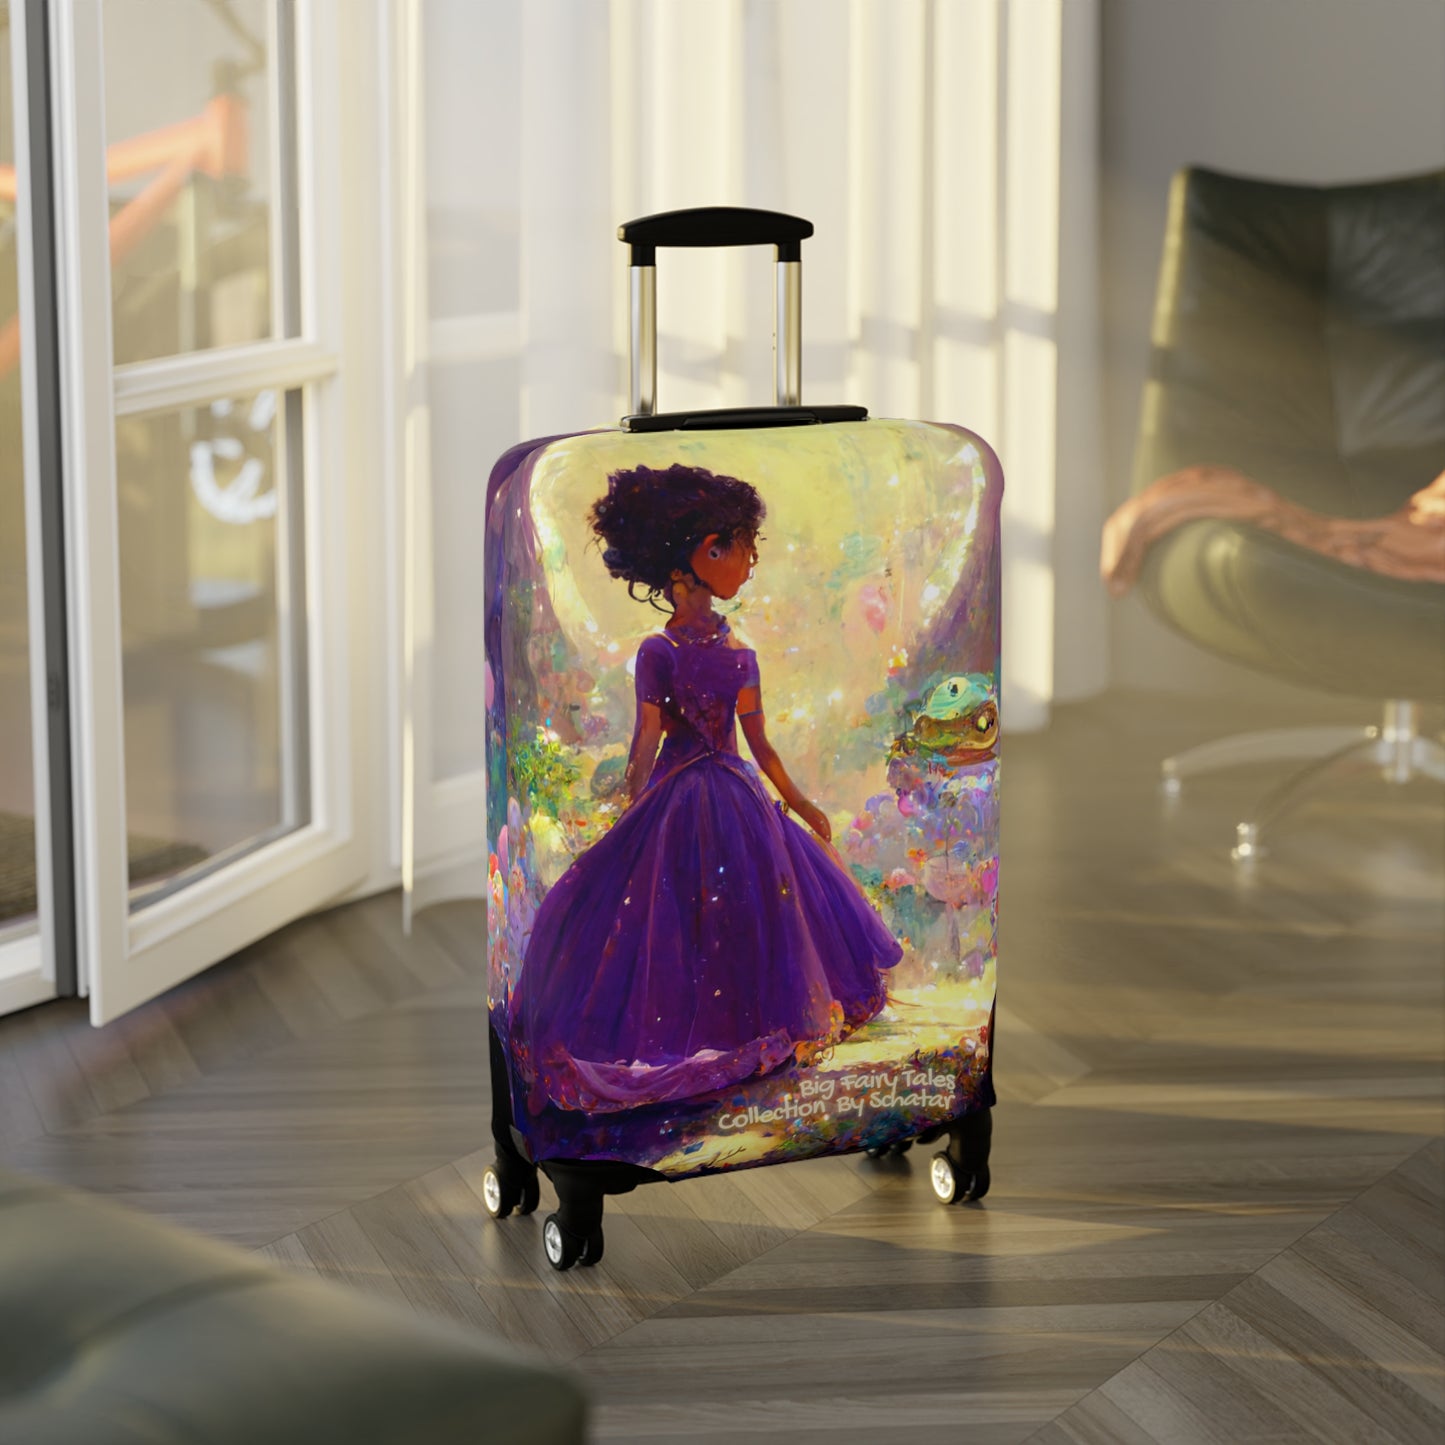 Big Fairy Tales By Schatar Princess And The Frog Prince Luggage Cover